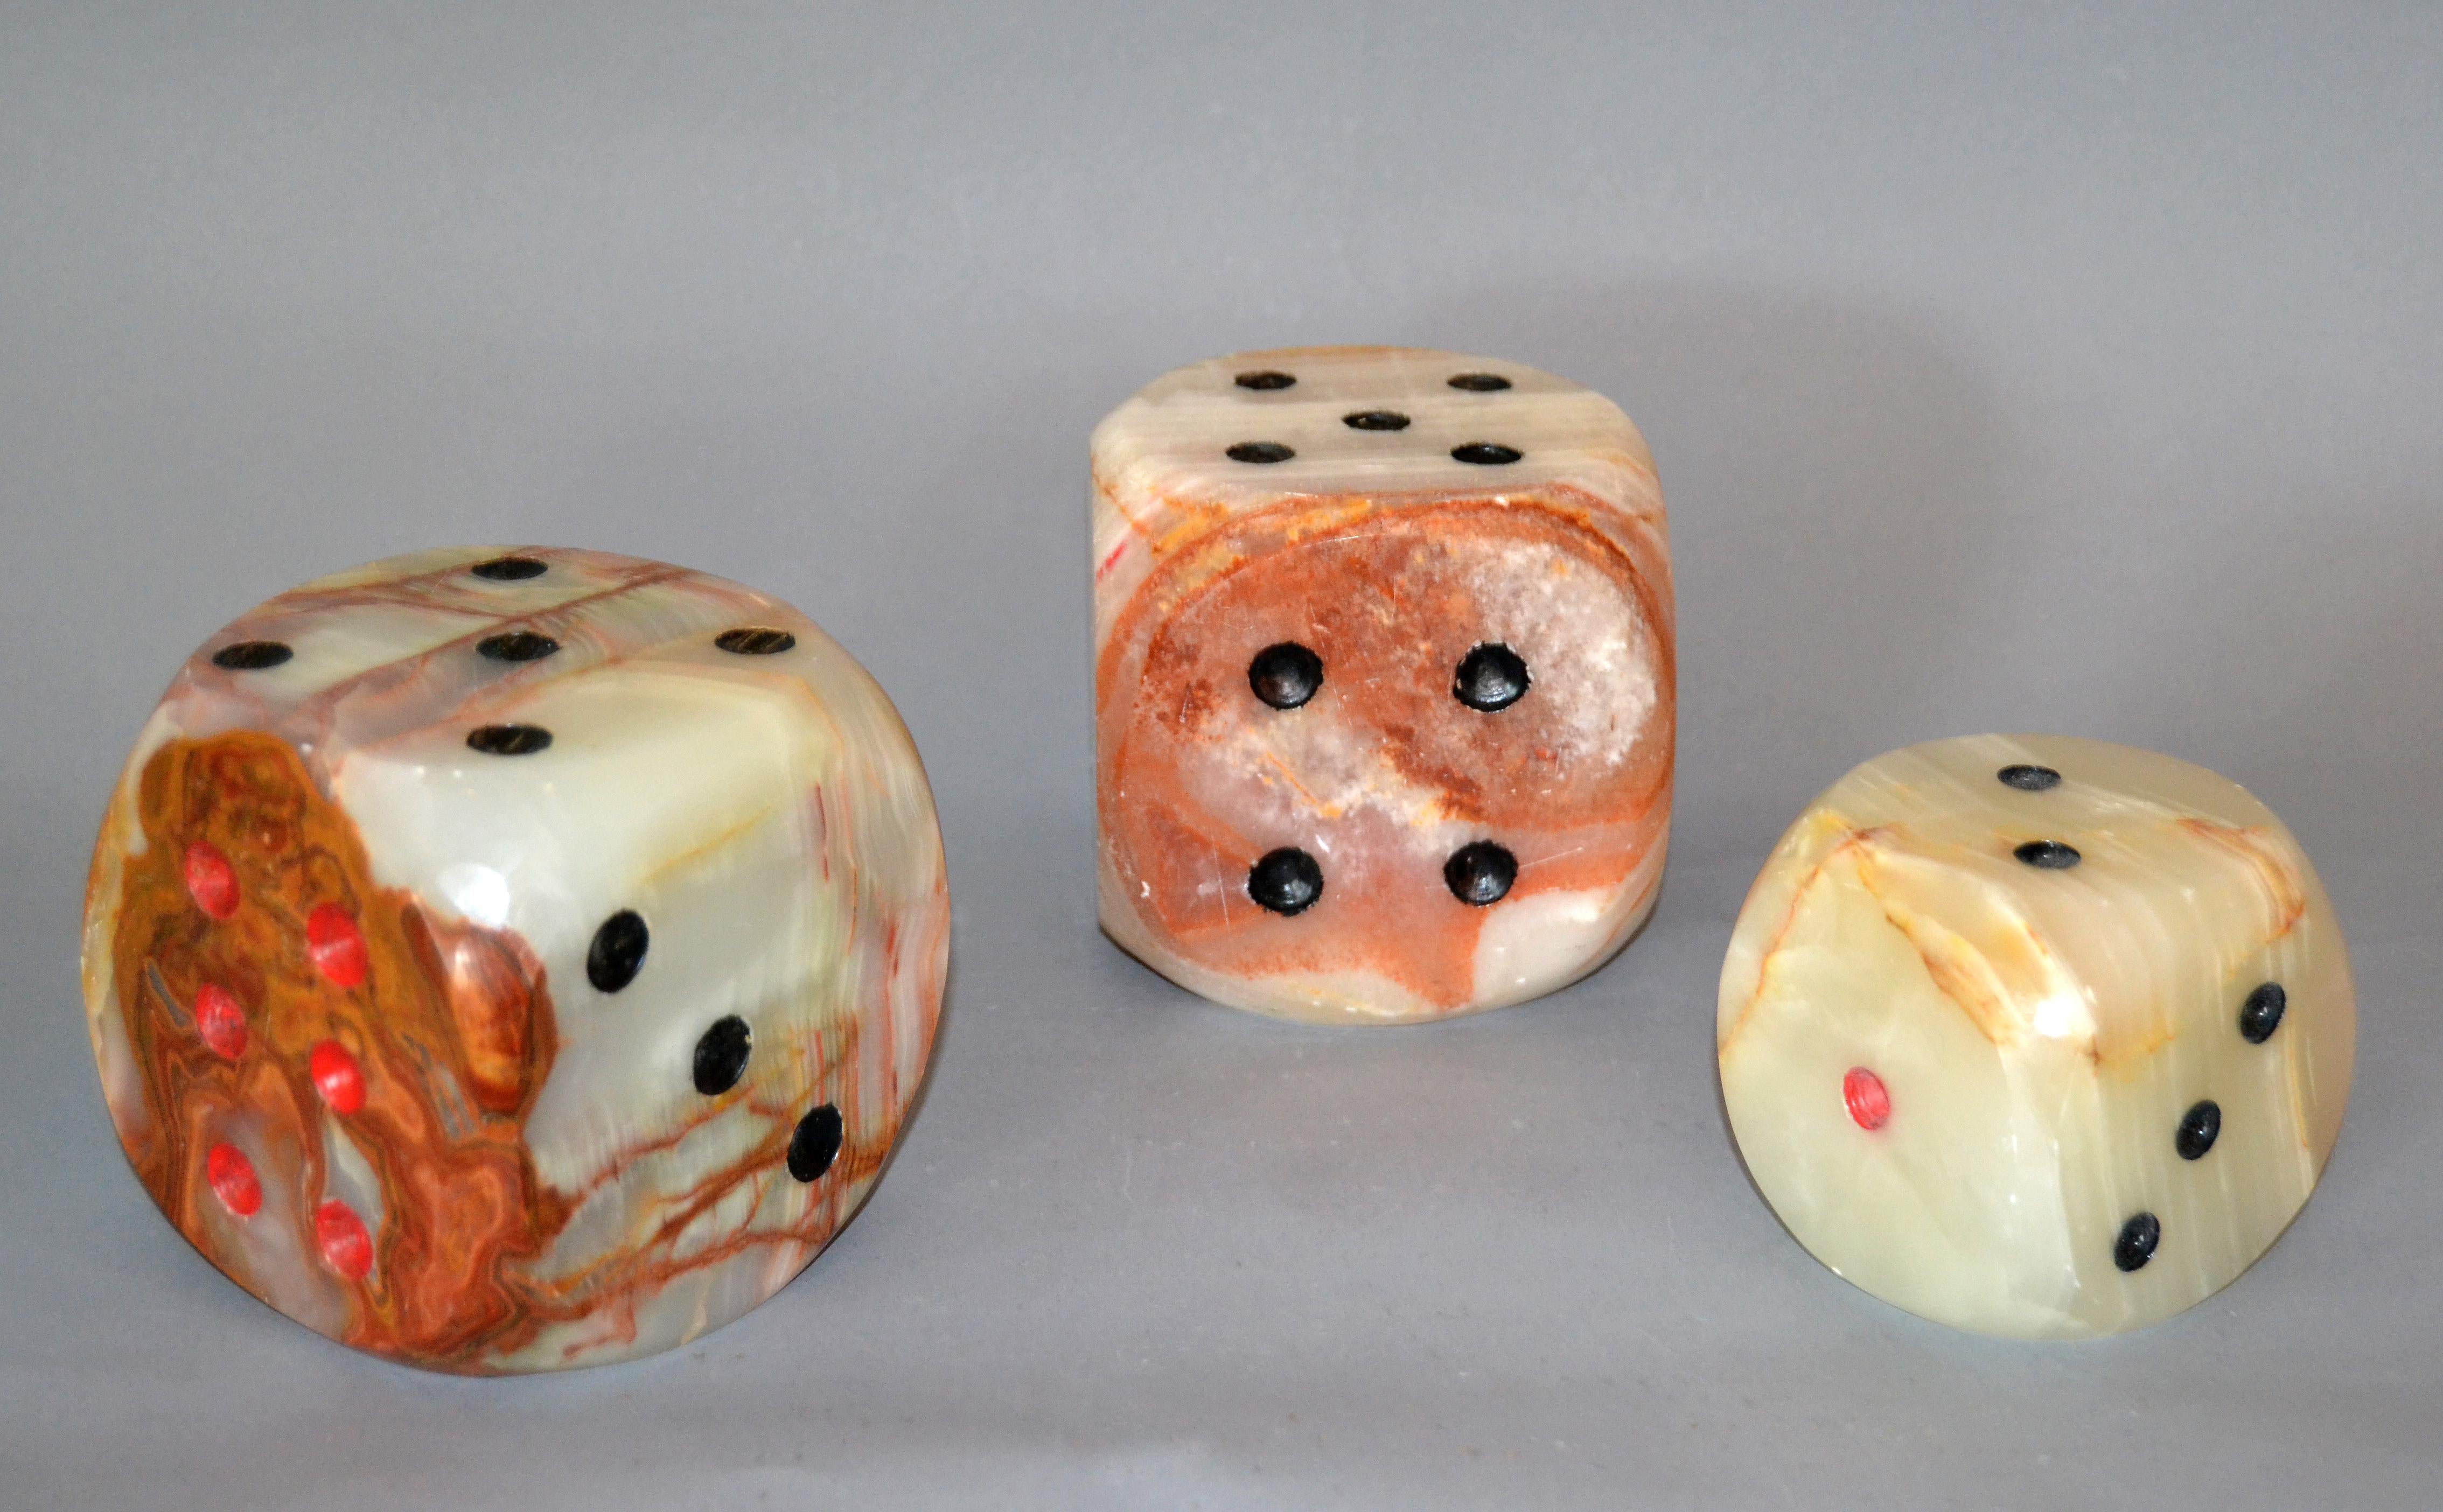 Set of 3 oversized Mid-Century Modern handcrafted marble and onyx dice table sculptures.
Two have the same size, one is smaller.
Stunning grain pattern. The set works very well as bookends too.
Dimension smaller dice:
3.13 x 3.13 x 3.13 inches.